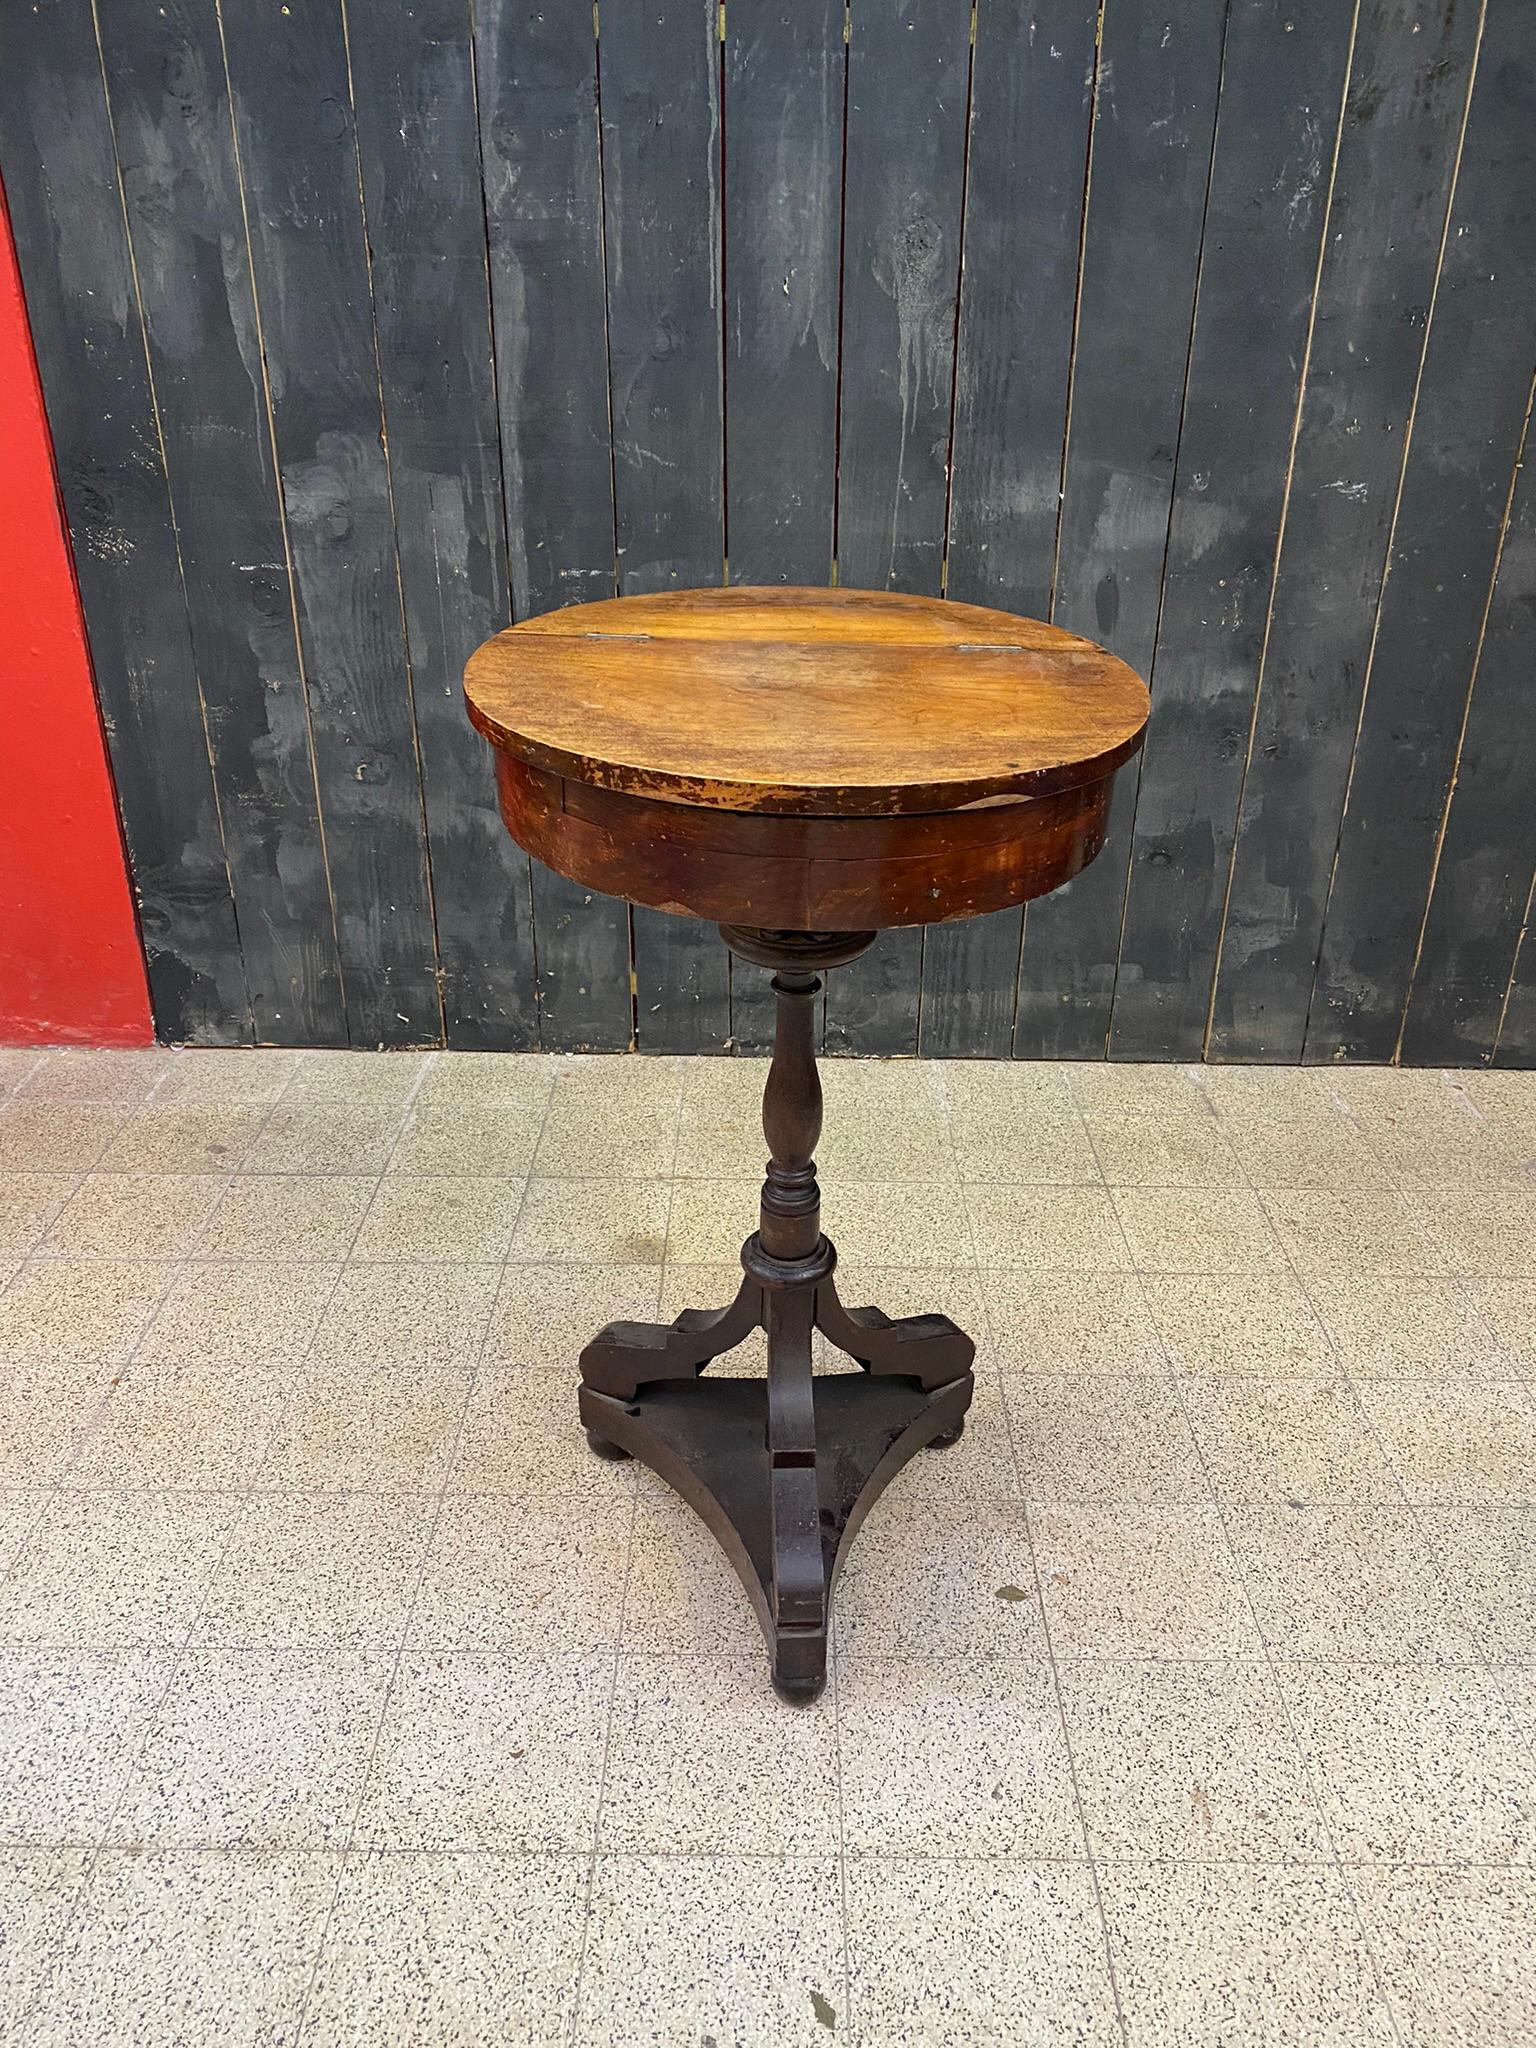 Charming cherry wood side table
Napoleon III period
Good condition, patina of the tray to be reviewed.